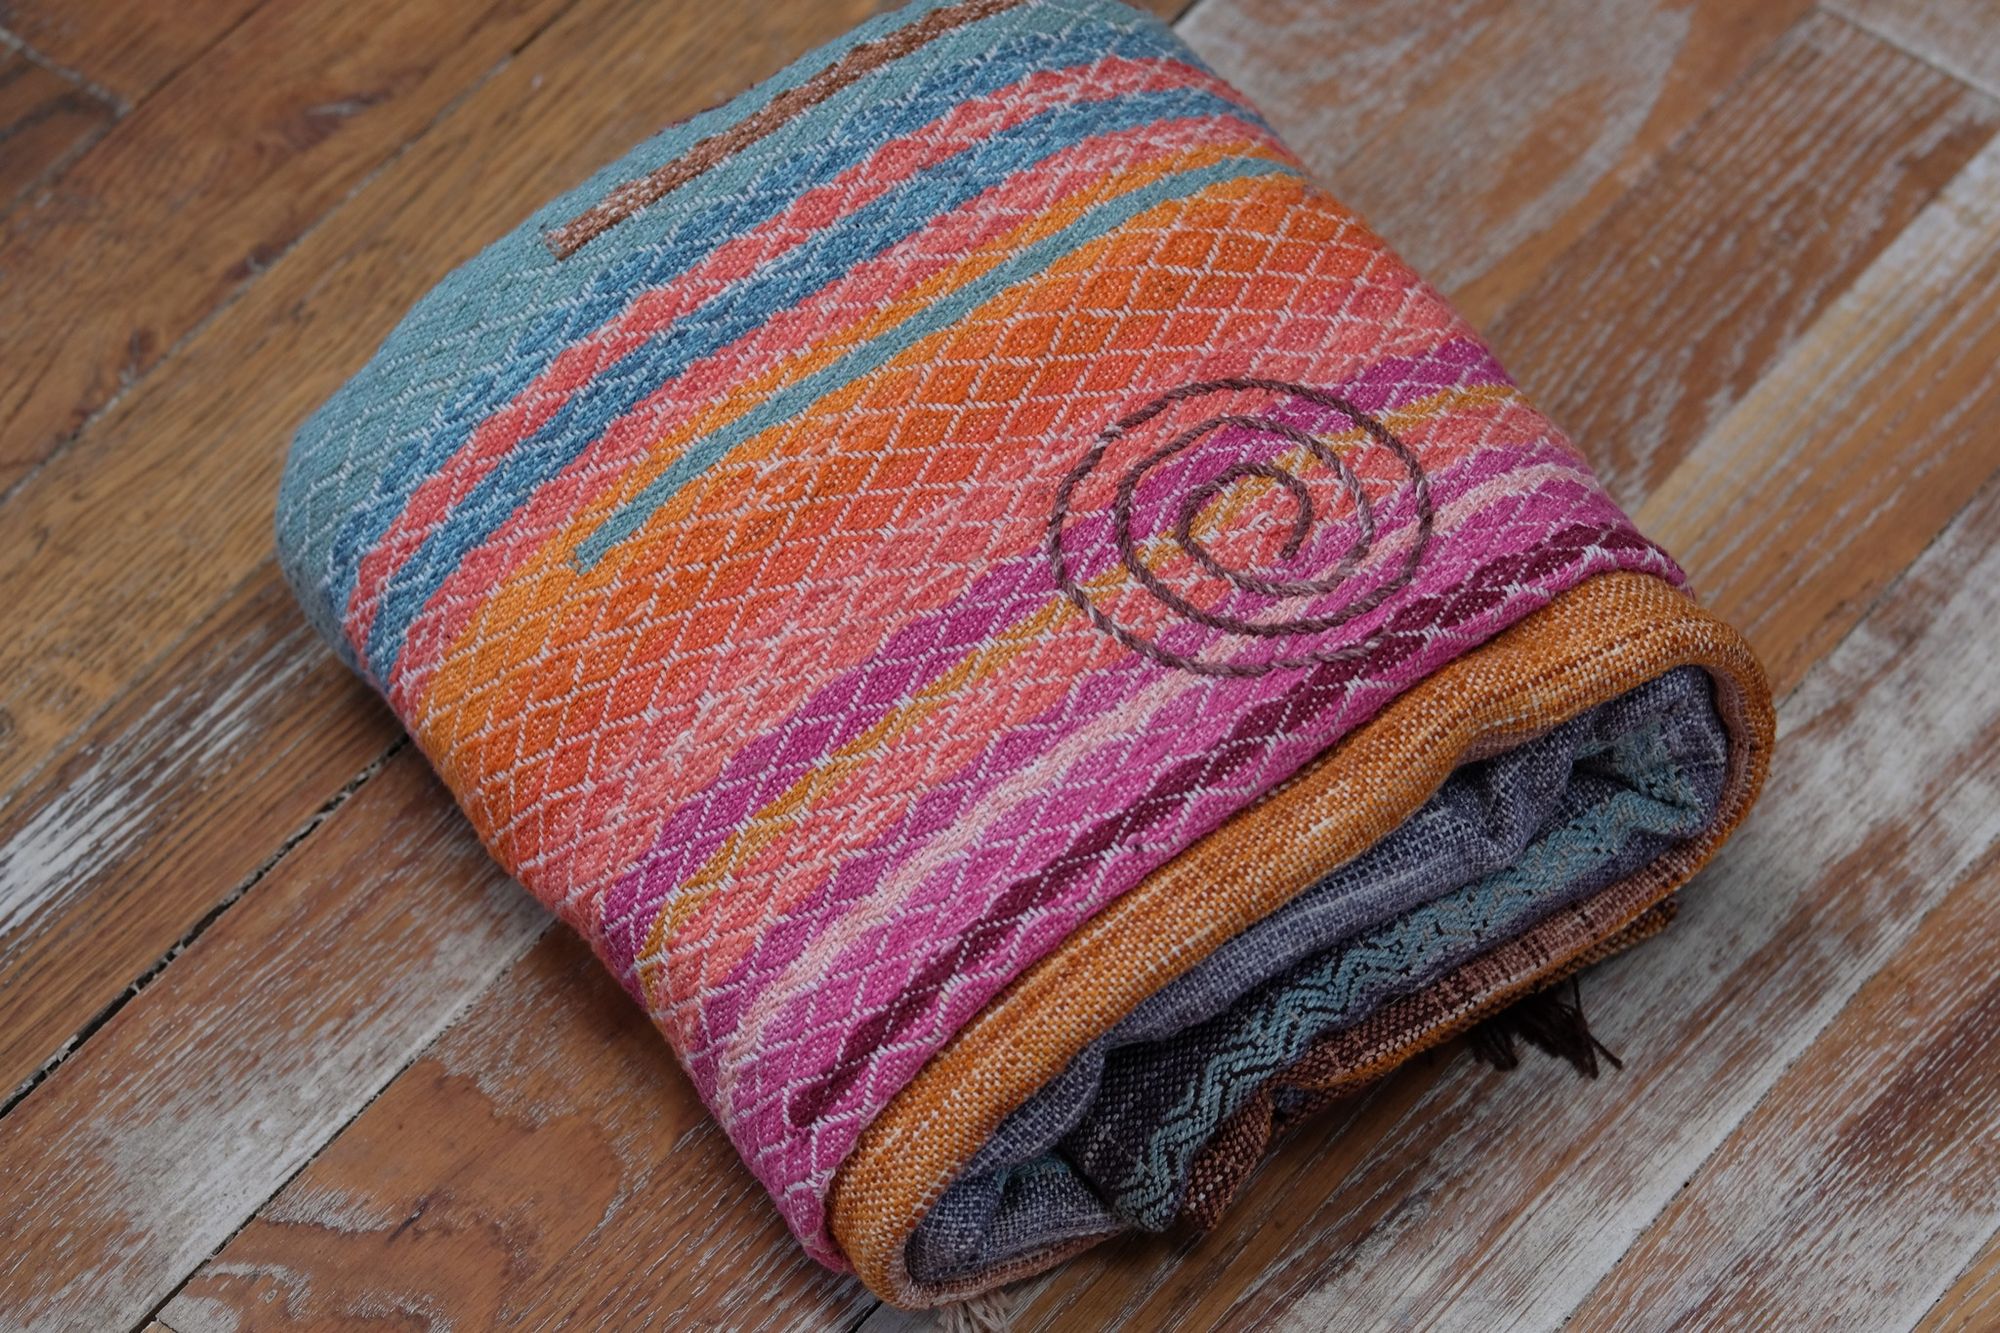 A detailed image of a brightly colored piece of handwoven fabric laying on a wood floor. It is in all shades of sunset pink, orange and gold, as well as blue and green. it has a spiral and crescent moon design on it as well